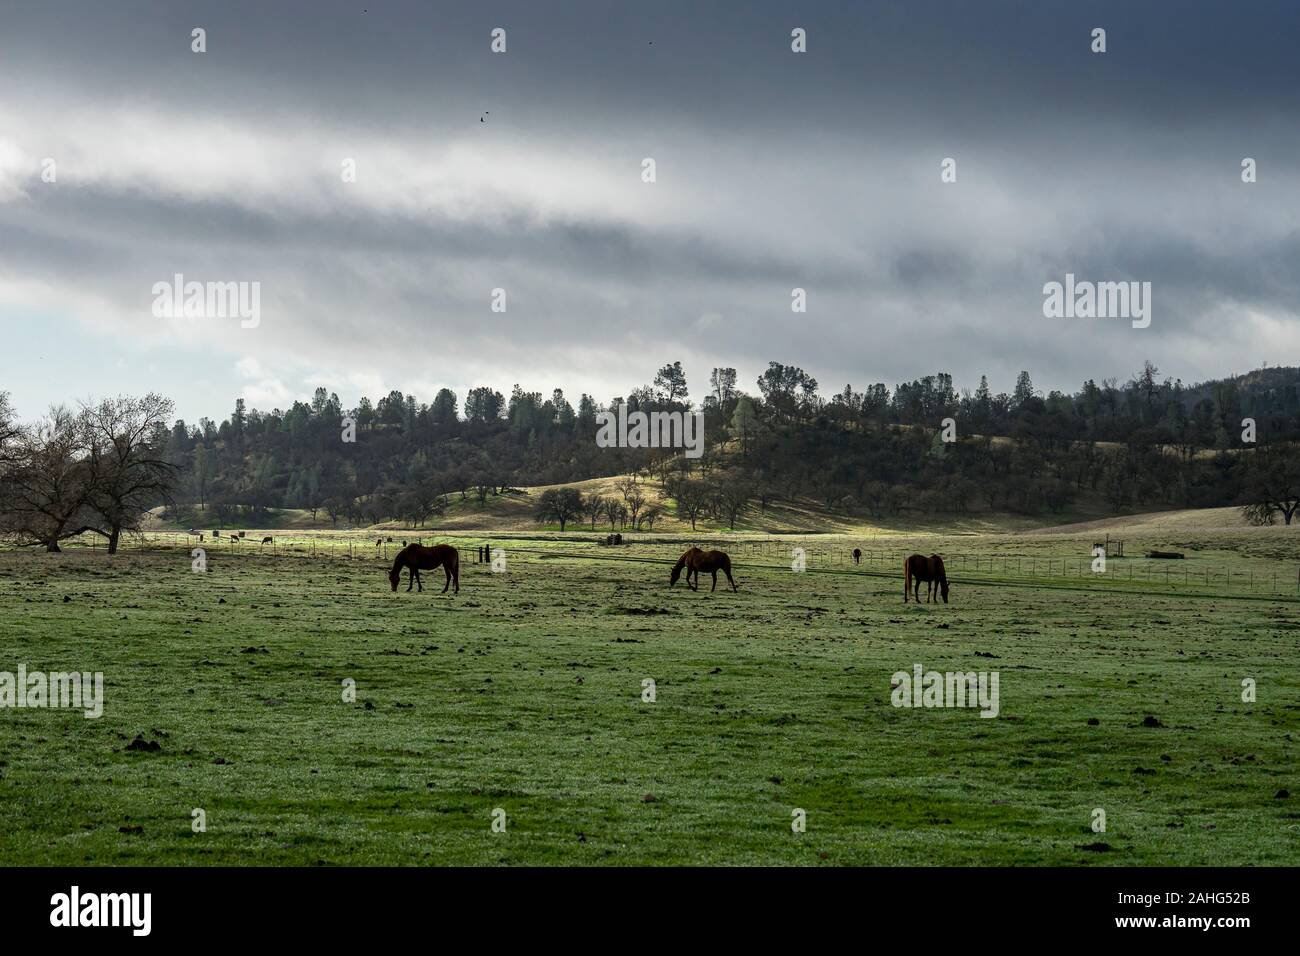 Horses grazing on green grass on a cloudy morning Stock Photo